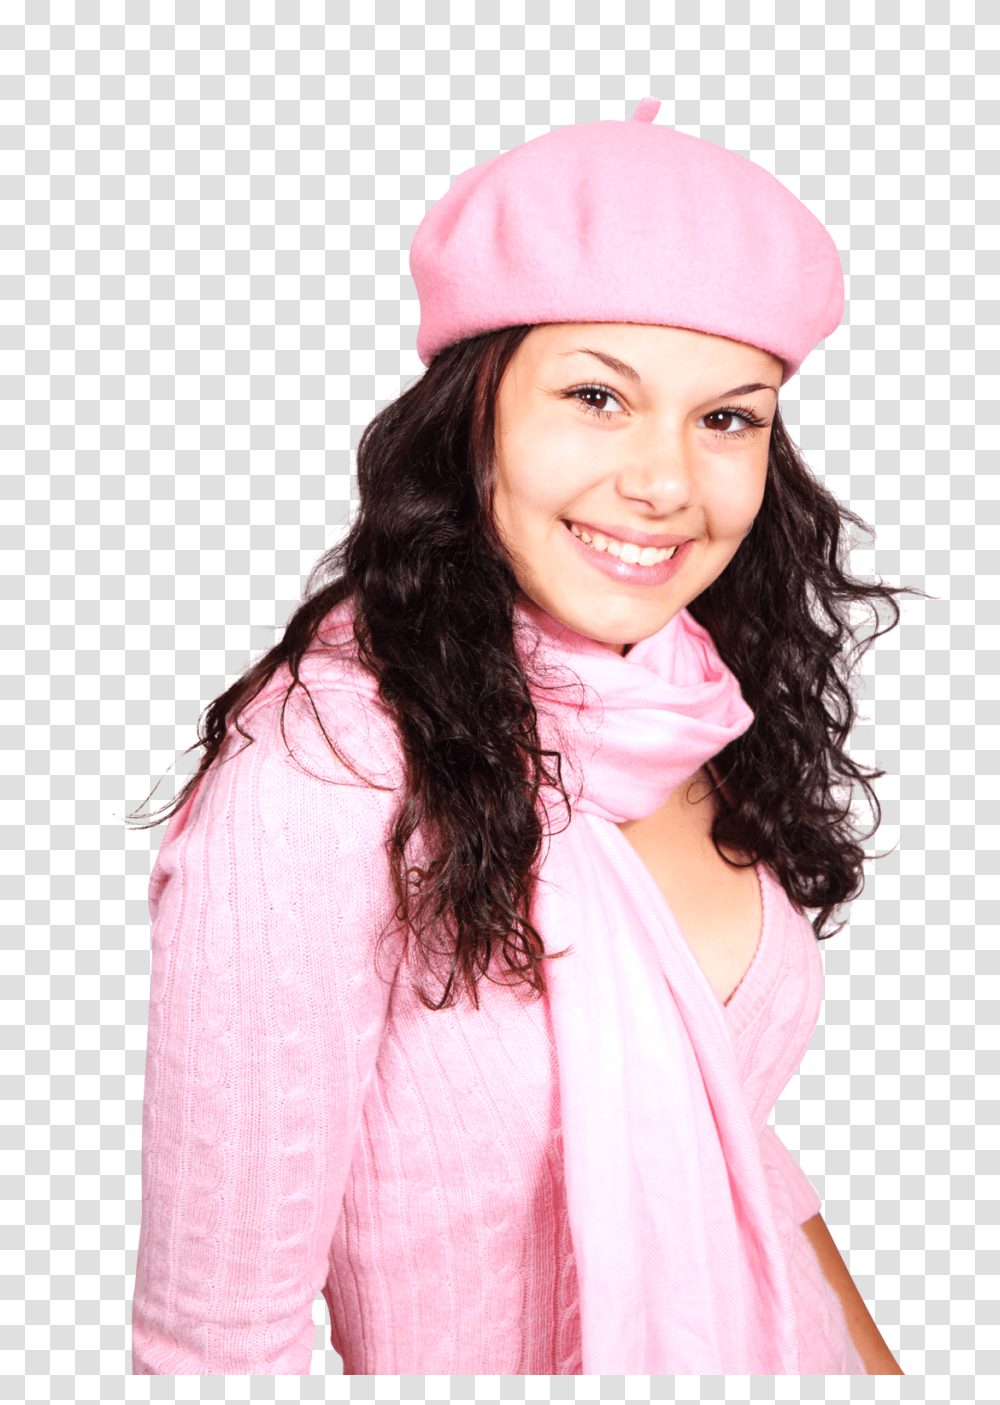 Beautiful Girl In Pink Dress Image, Person, Face, Hat Transparent Png